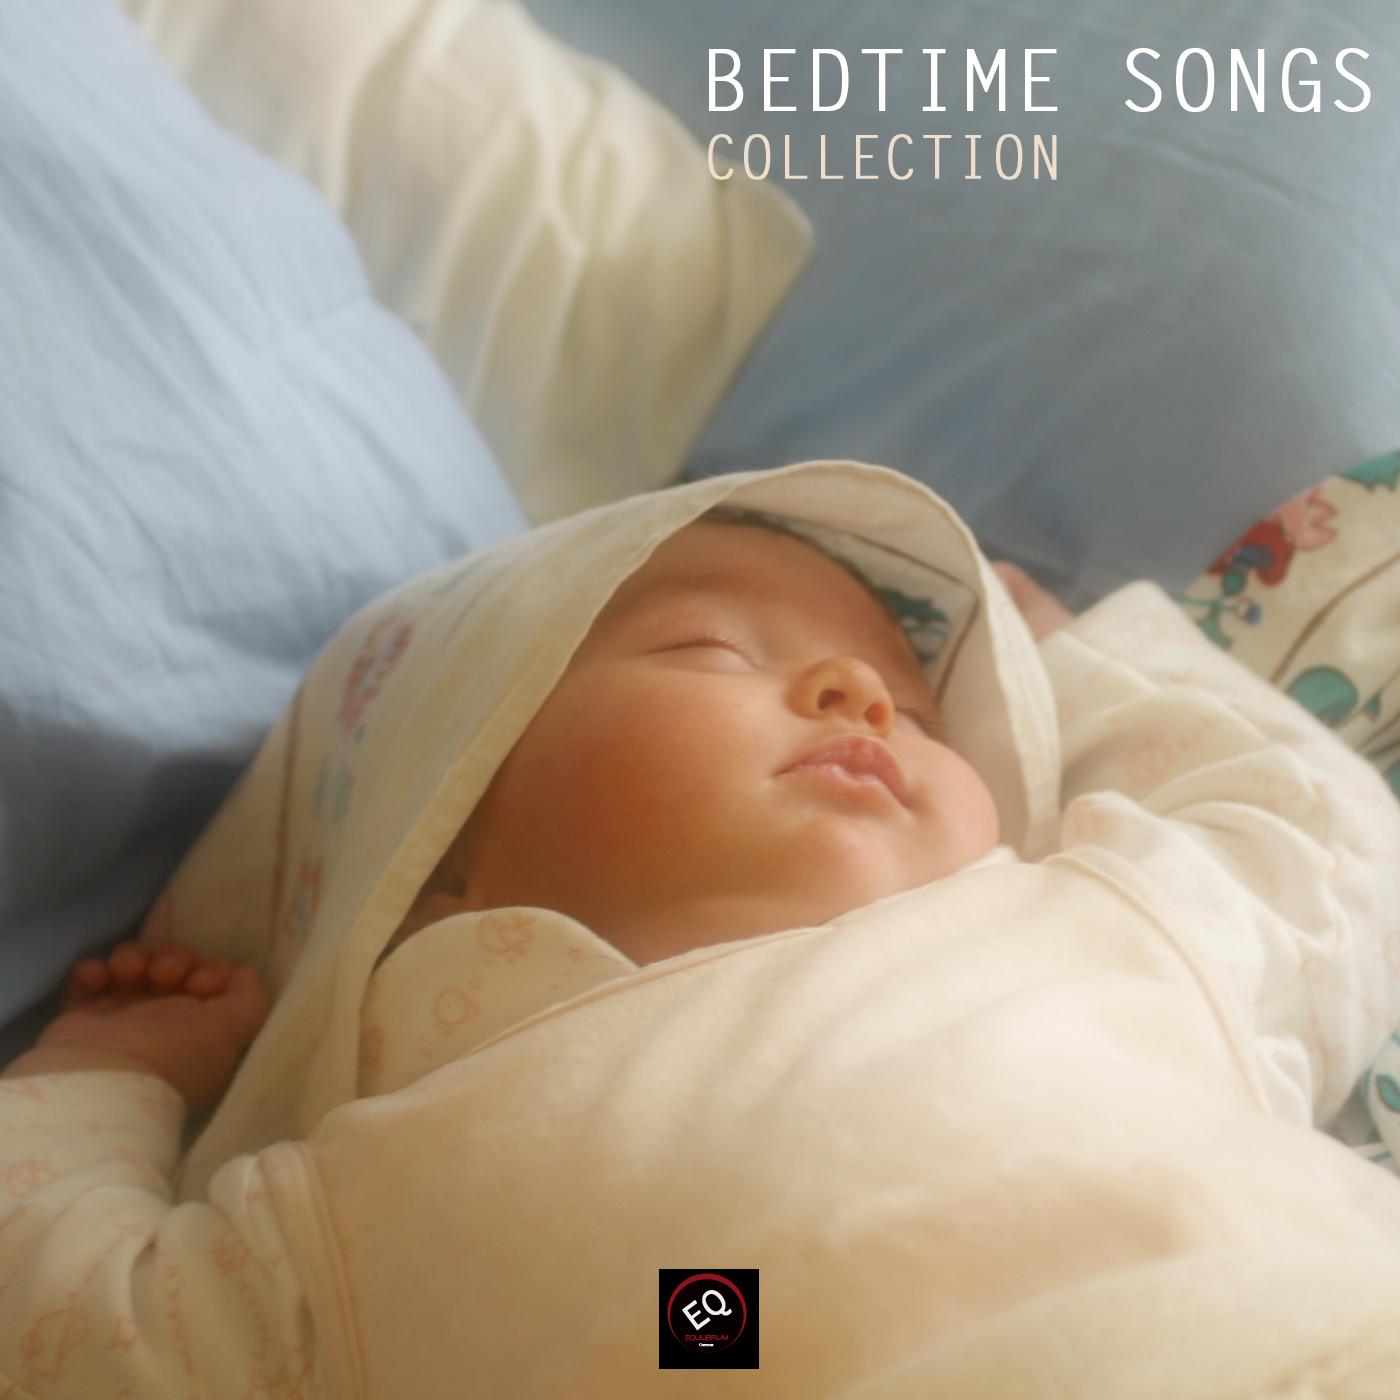 Lullabies and Relaxation Music